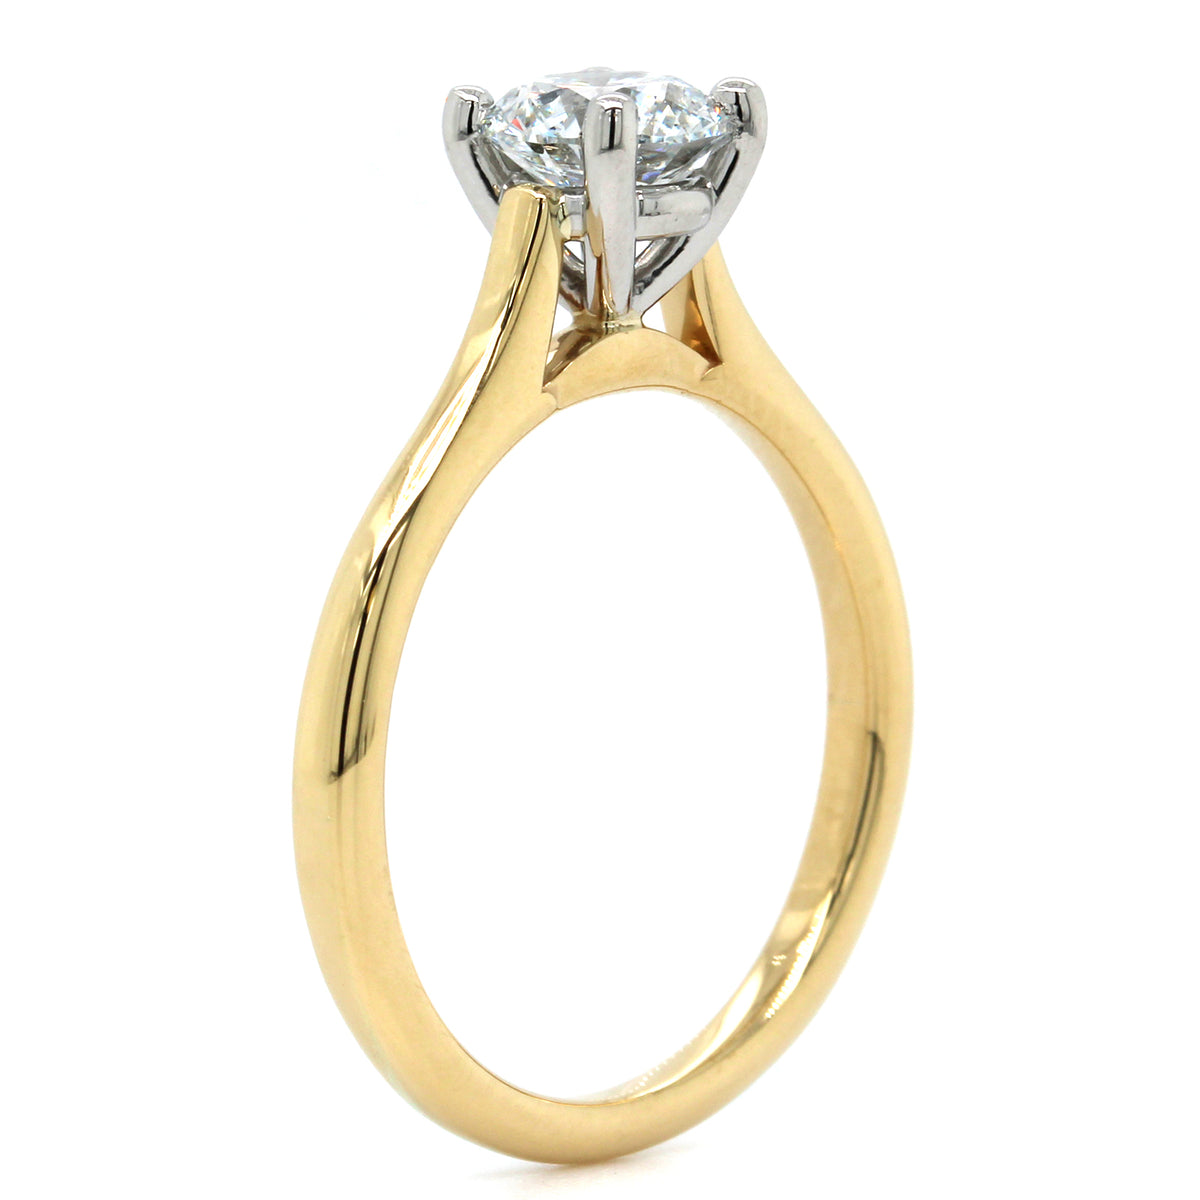 18K Yellow Gold and Platinum Diamond Solitaire Engagement Ring